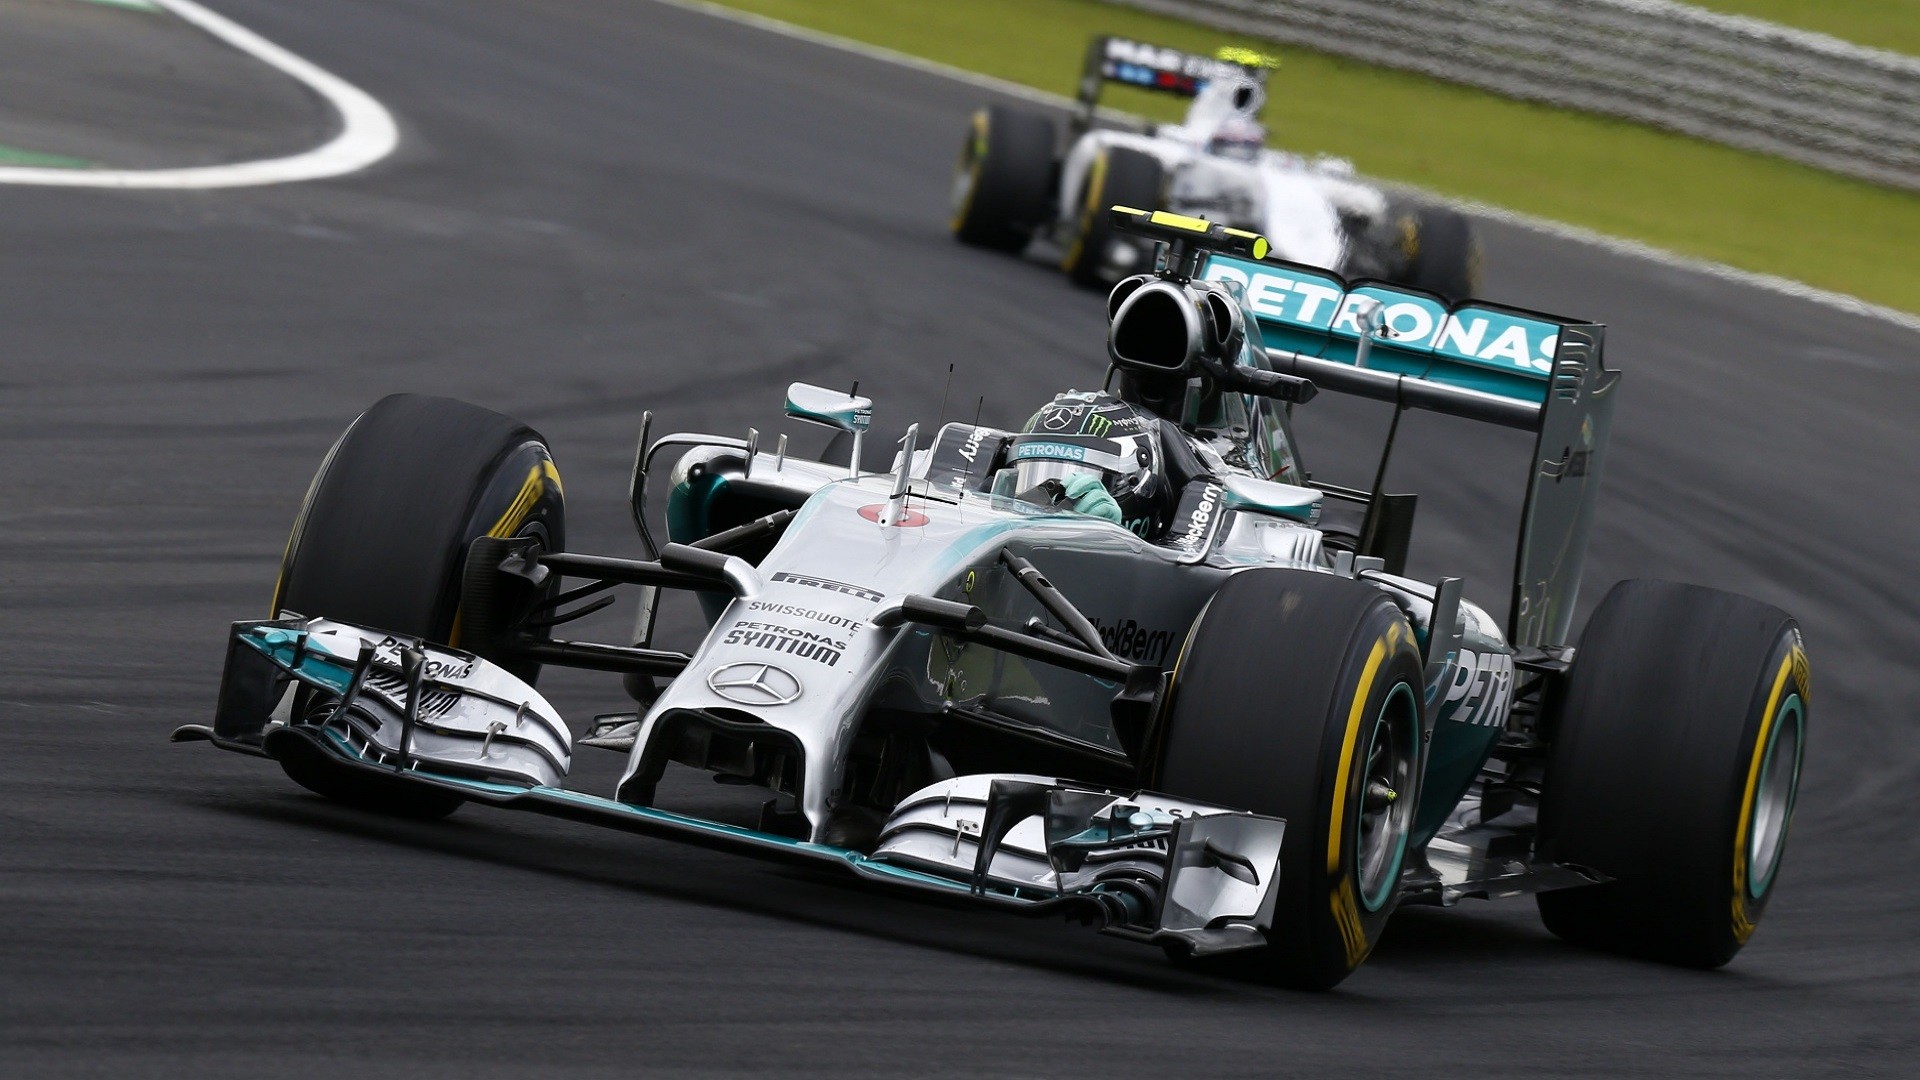 F1 Mercedes Wallpaper Picture #kfW Cars Pinterest Wallpaper pictures and Cars